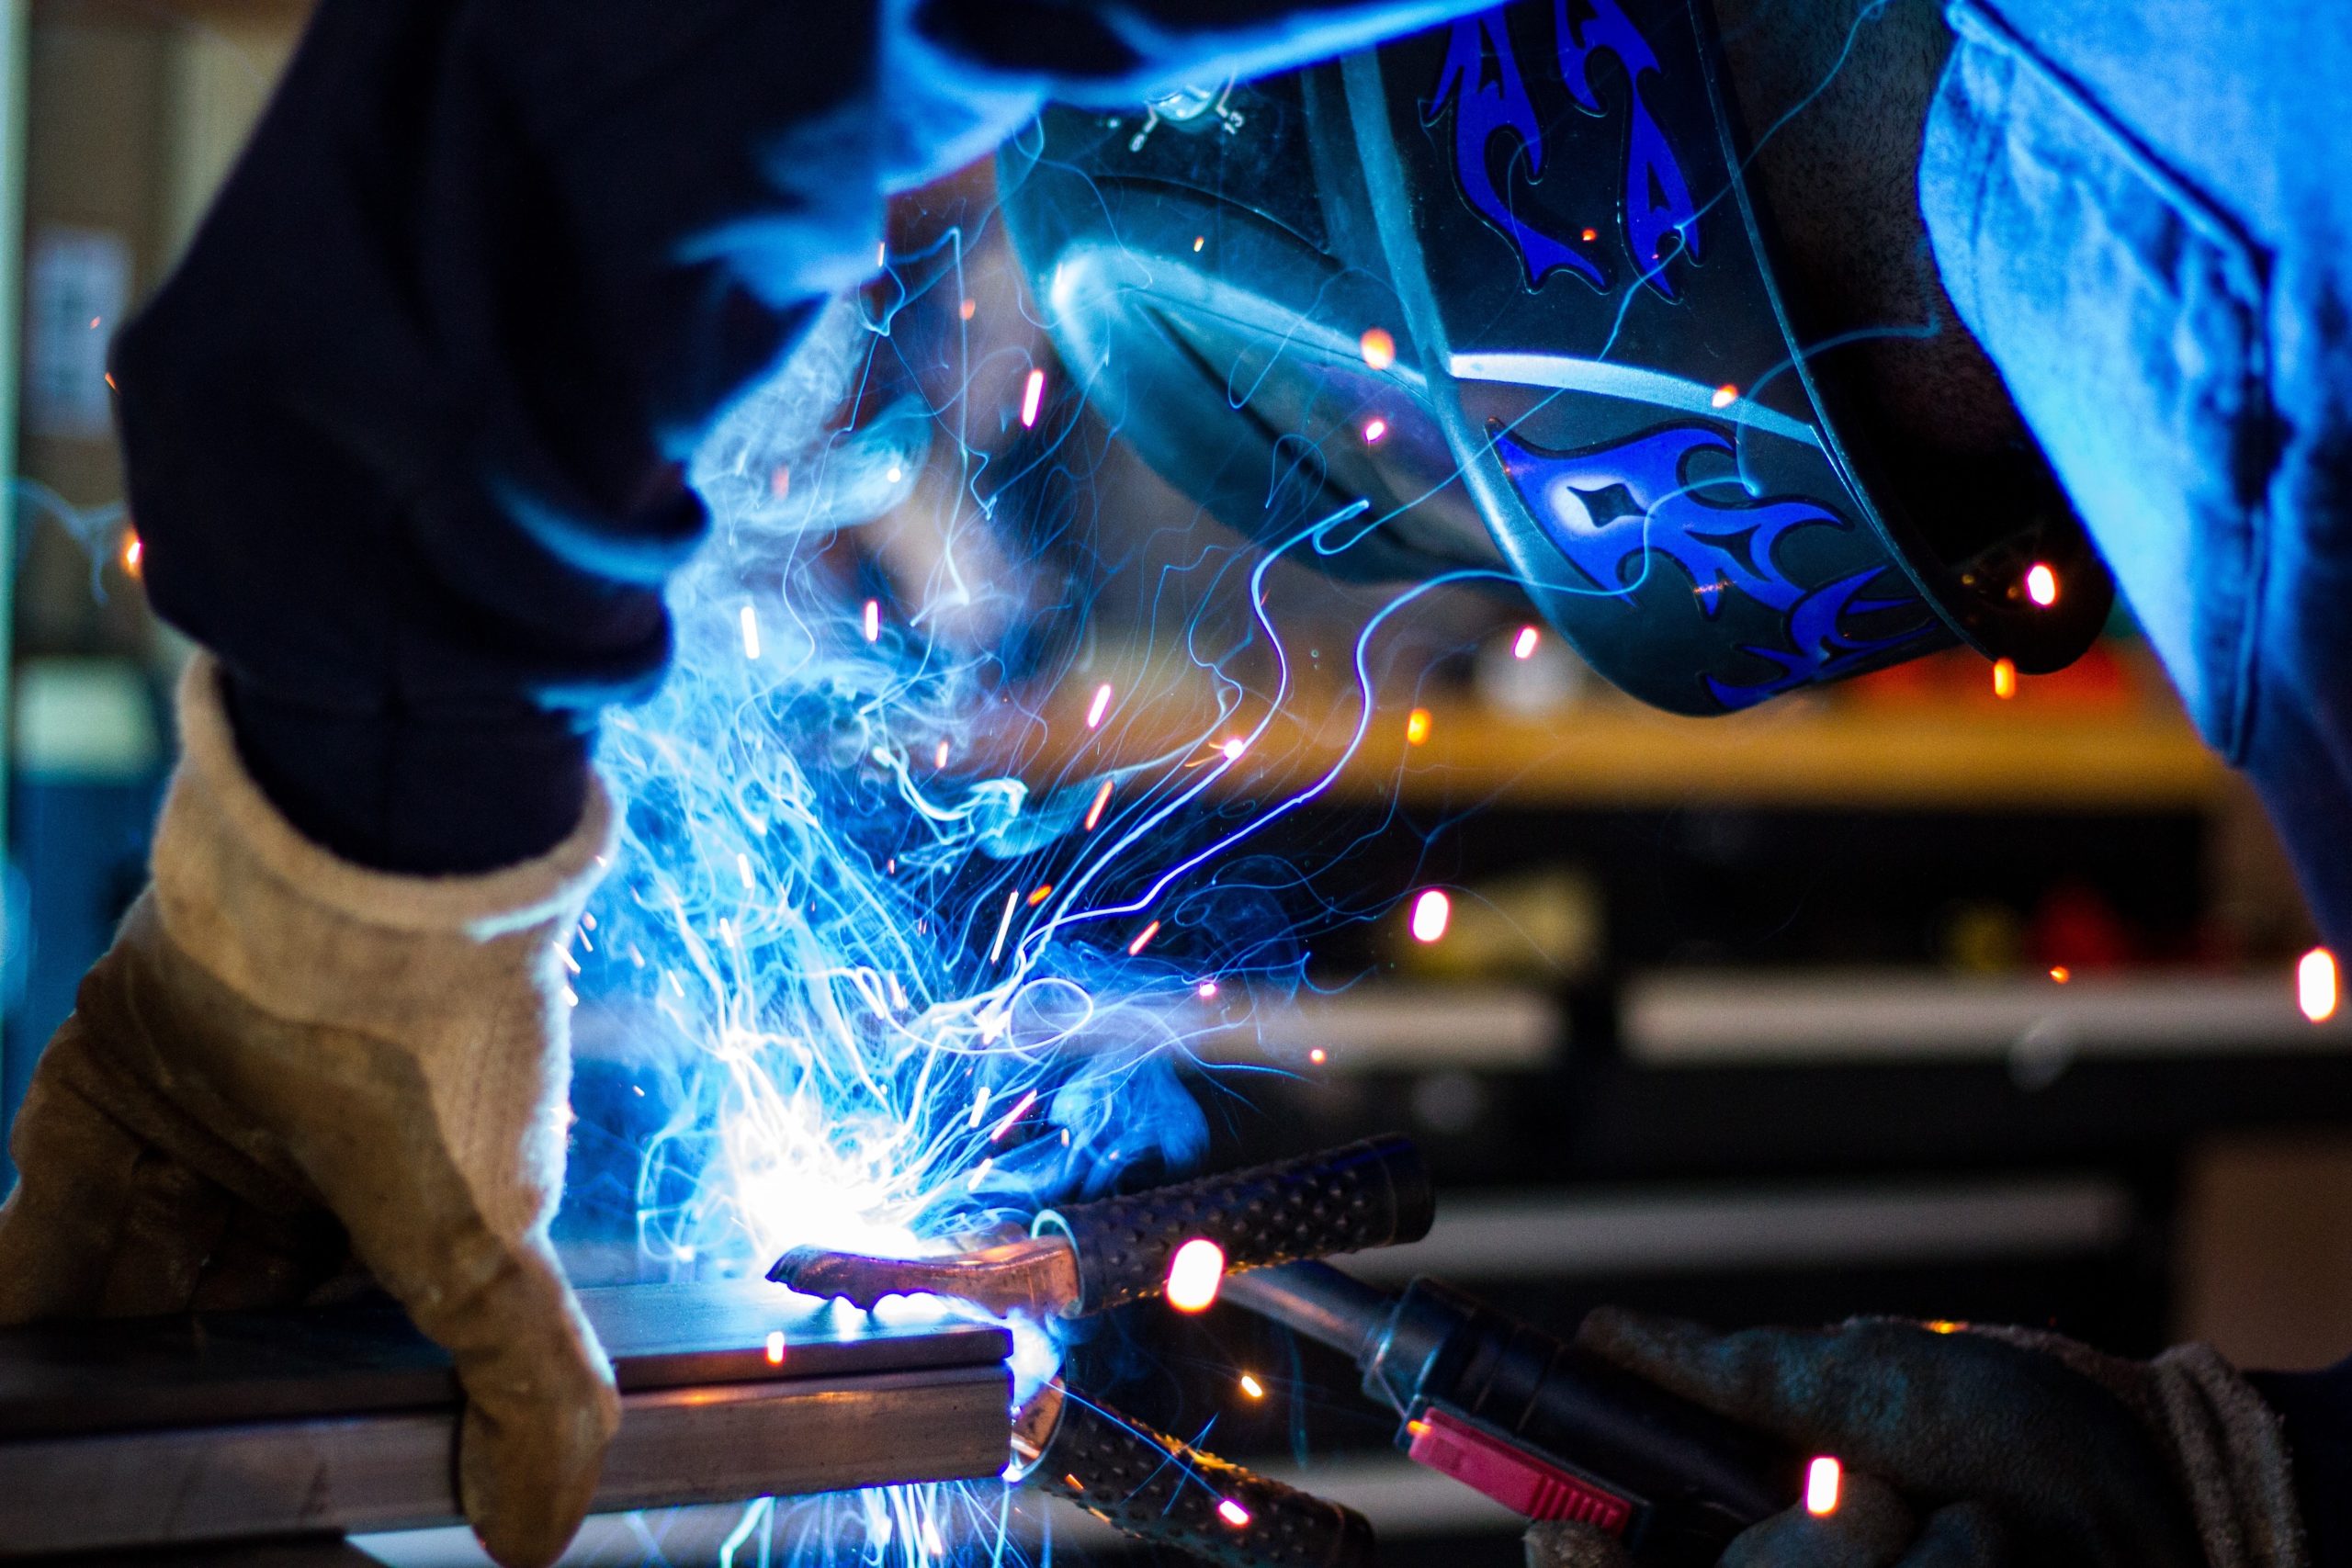 Read more about SFCC to offer Hobby Welding classes